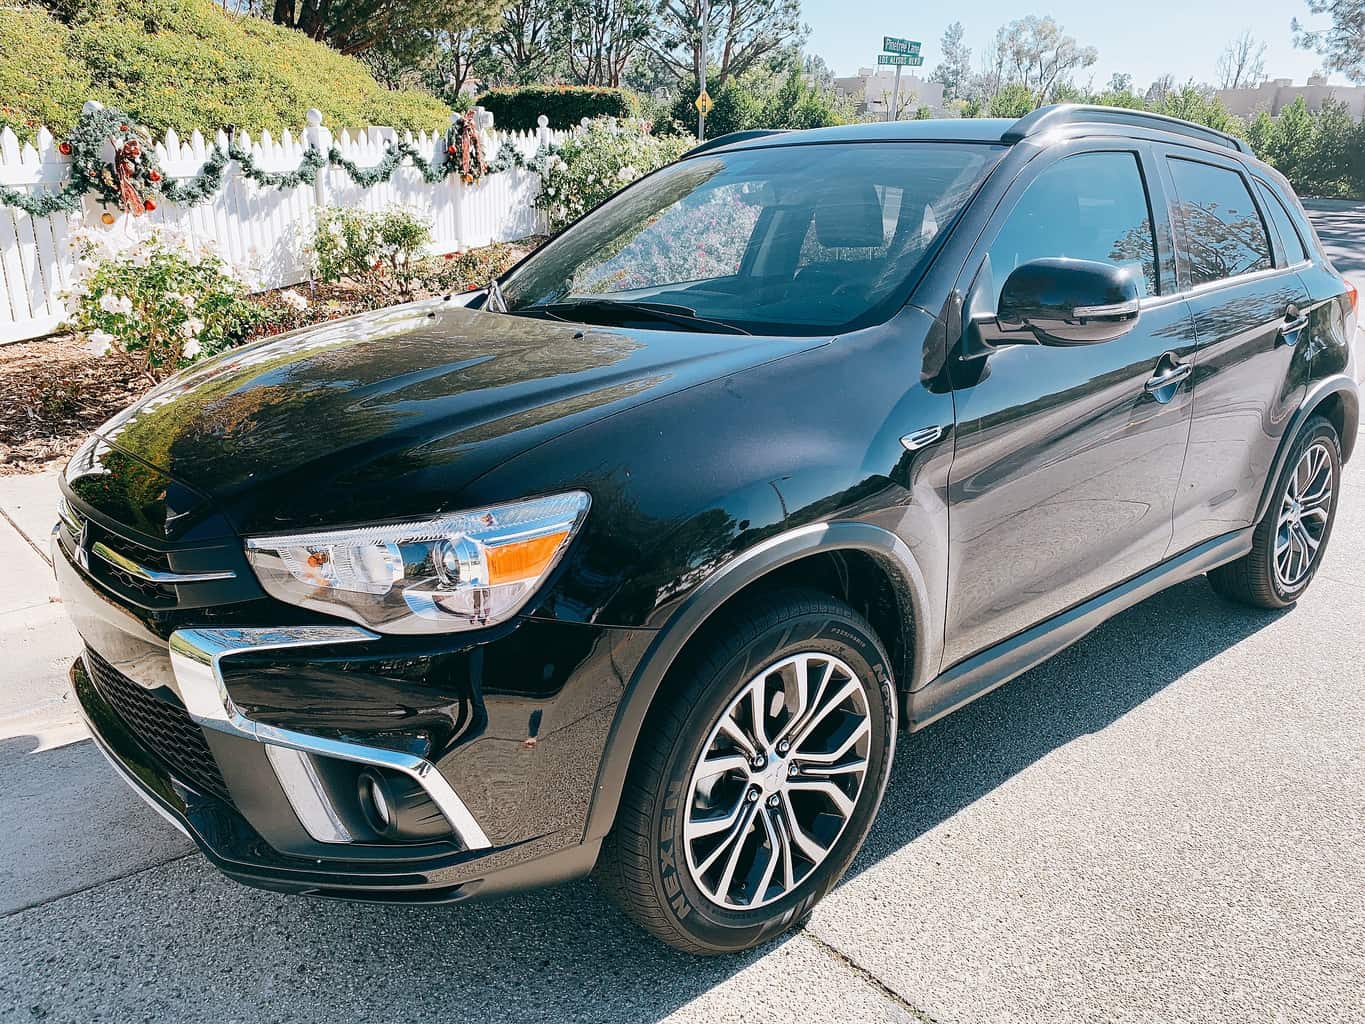 The 2019 Outlander Sport is a compact crossover that combines the versatility to carry people or cargo at an affordable price and had an EPA-estimated 30 mpg on the highway / 24 mpg in the city.